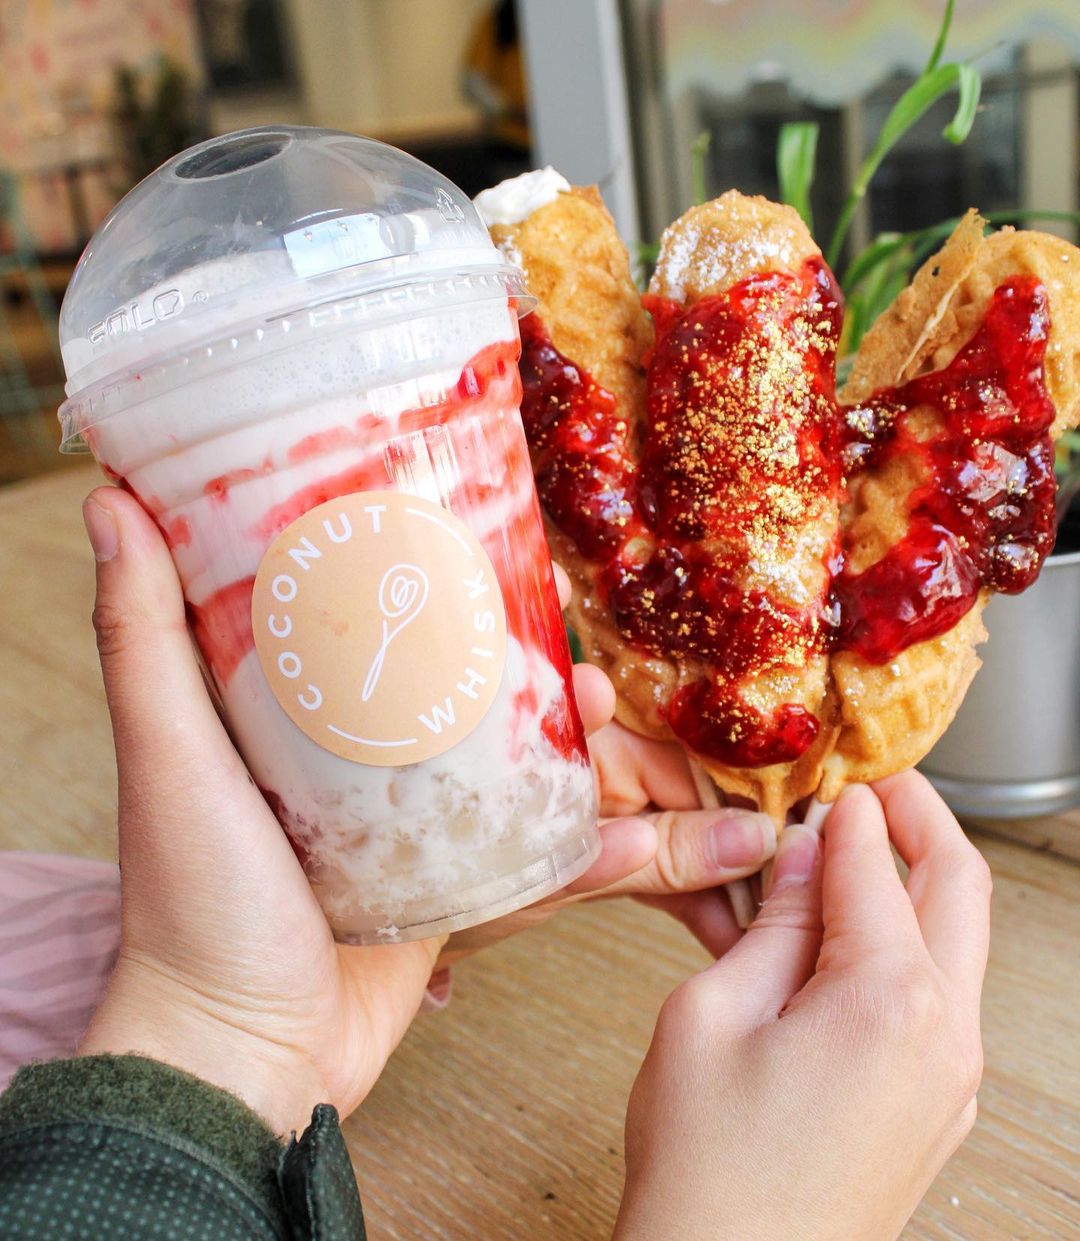 Person holding vegan milkshake and food from Coconut Whisk Café & Bubble Tea Shop